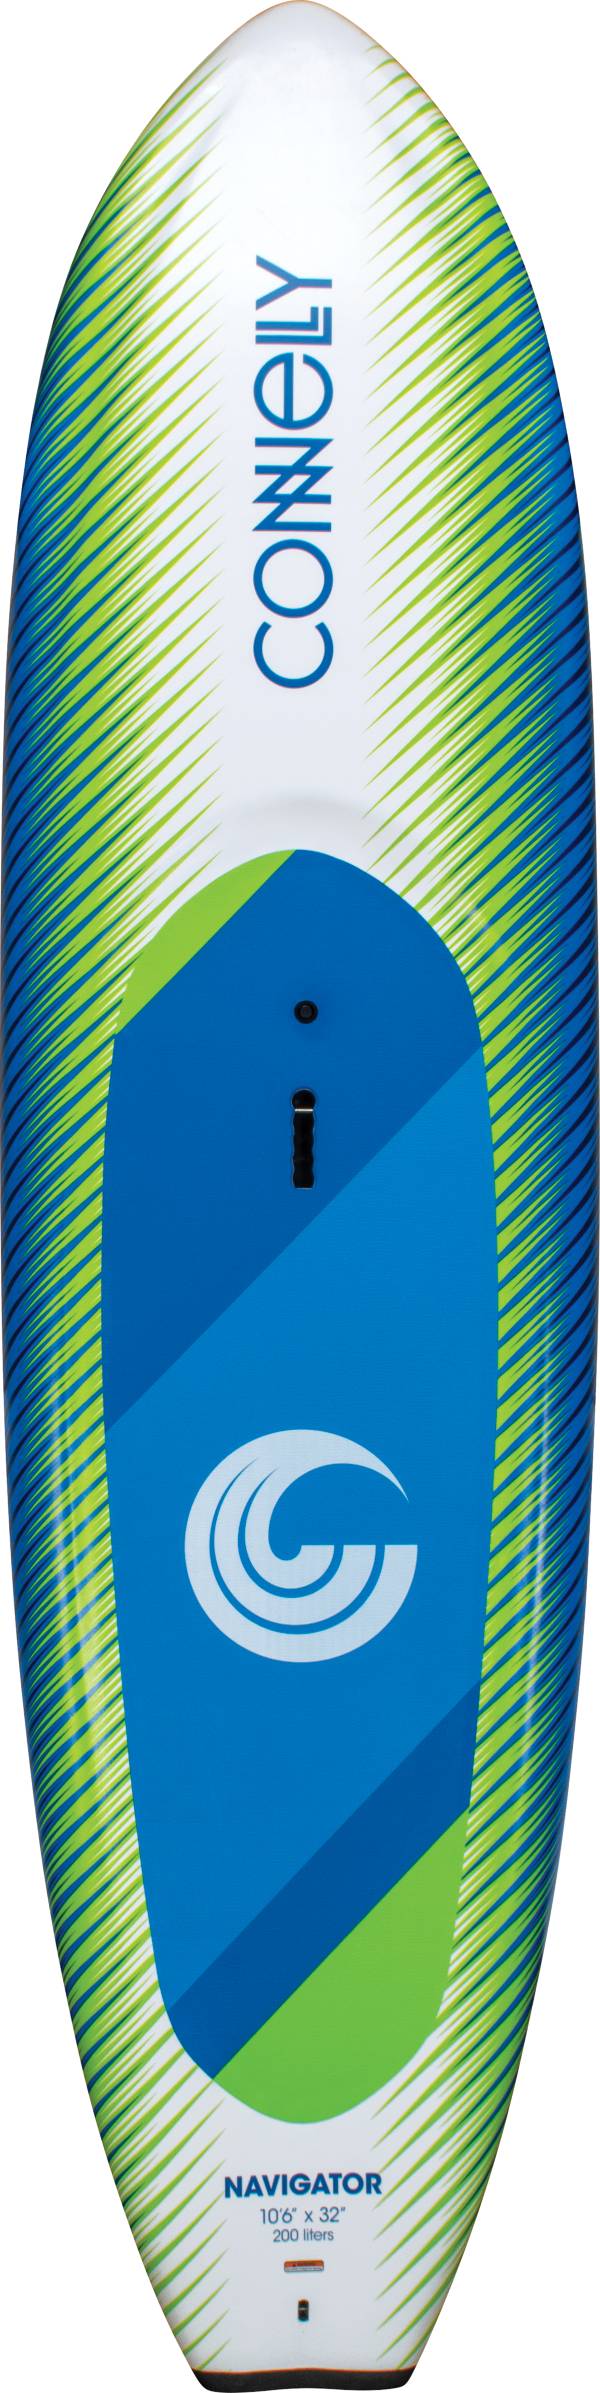 Connelly Navigator Soft-Top 106 Stand-Up Paddle Board product image